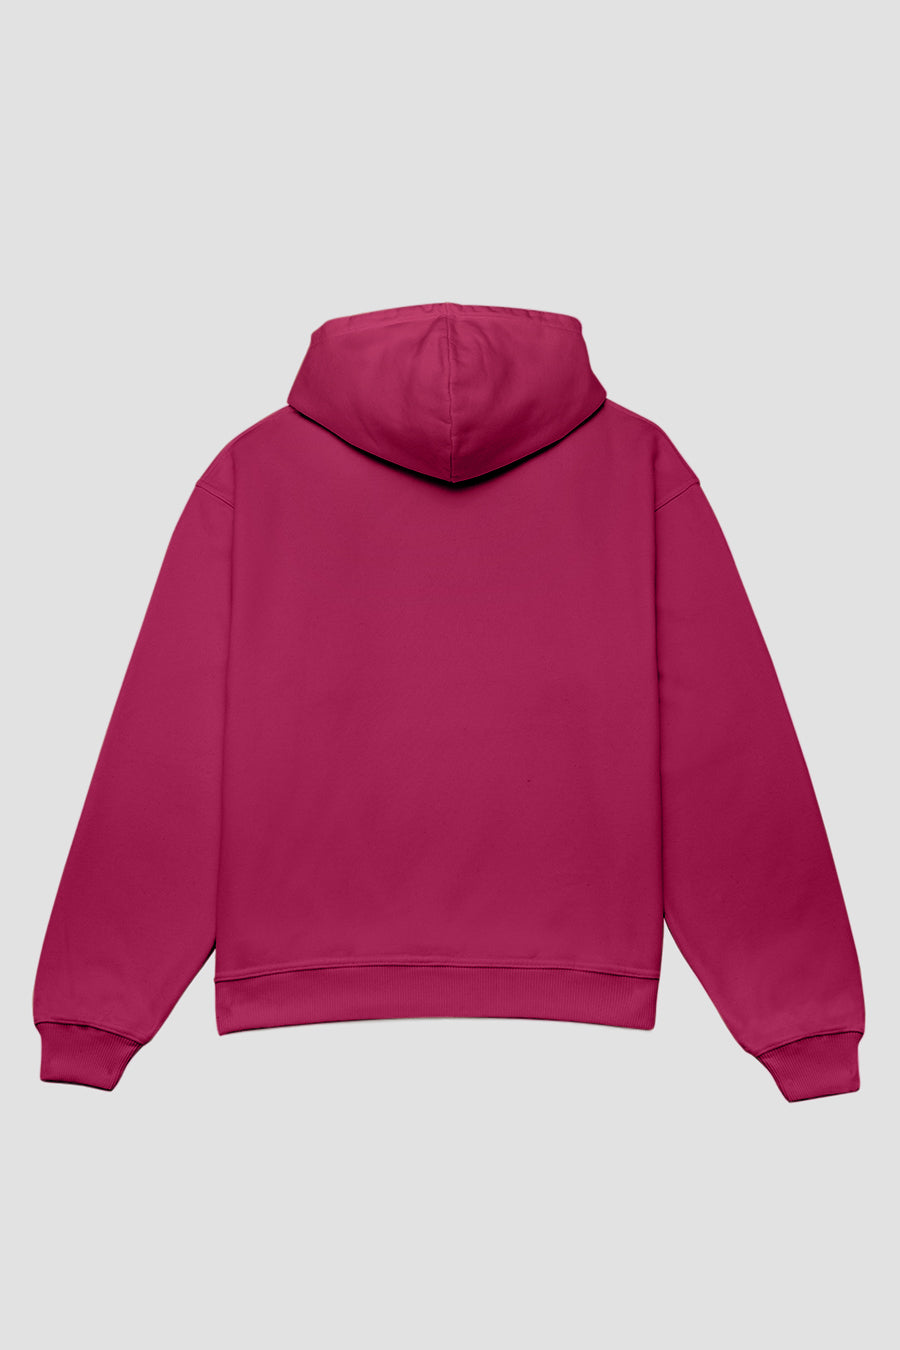 Burgundy Hoodie - only available in wholesale